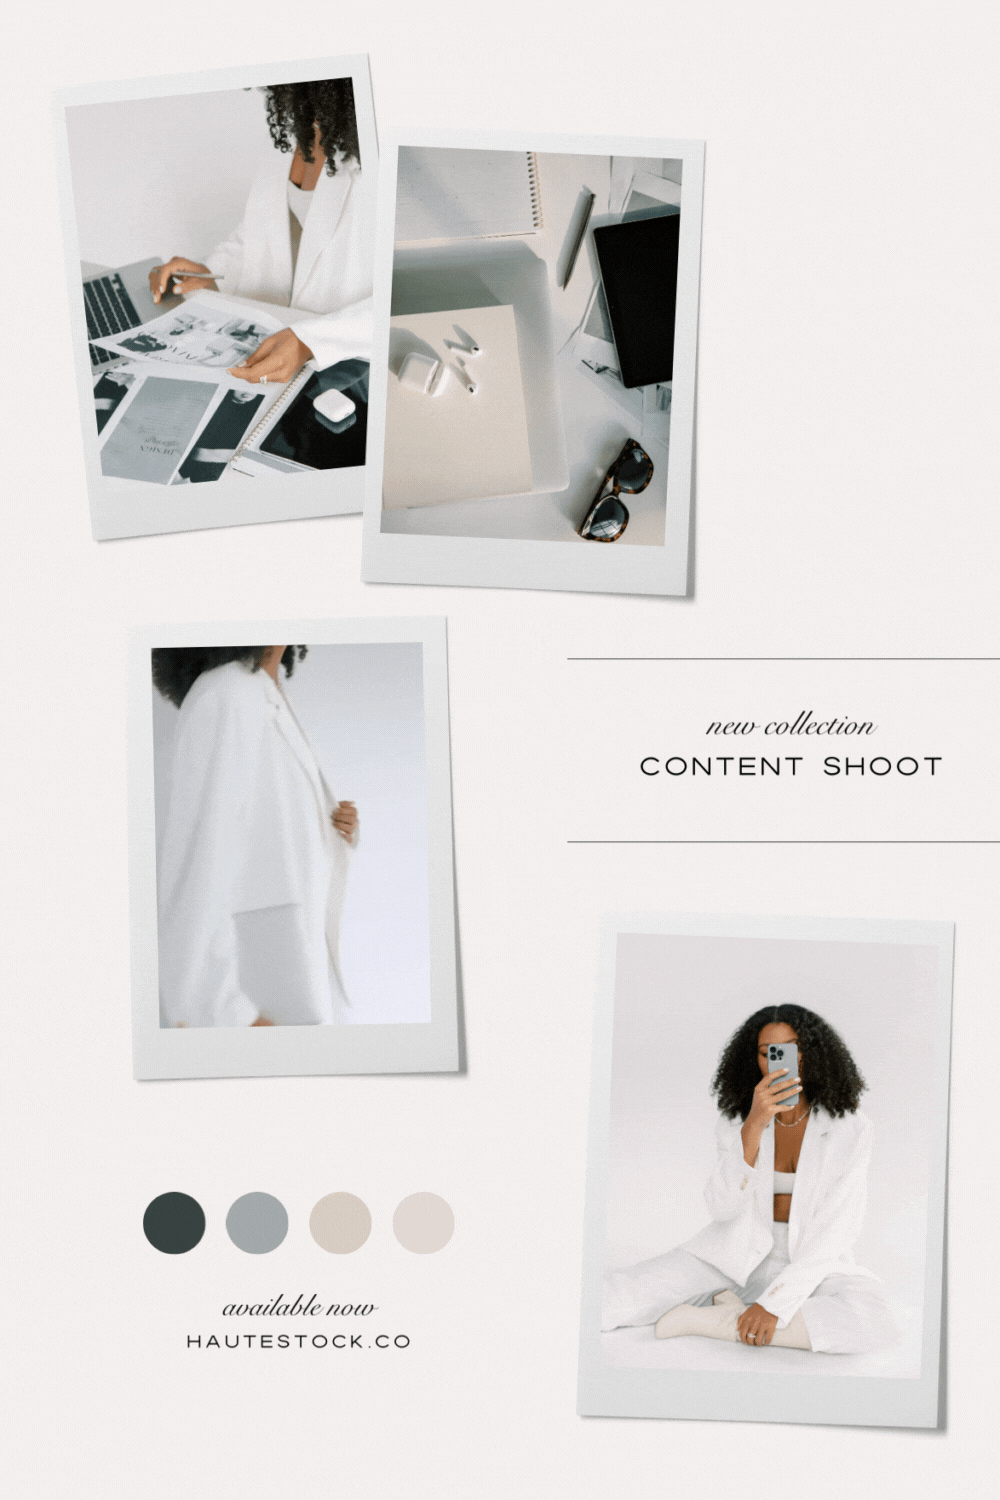 Moody, editorial workspace imagery from Haute Stock in a white color palette. These stock photos and stock videos are perfect to use on social, Pinterest, or your website.